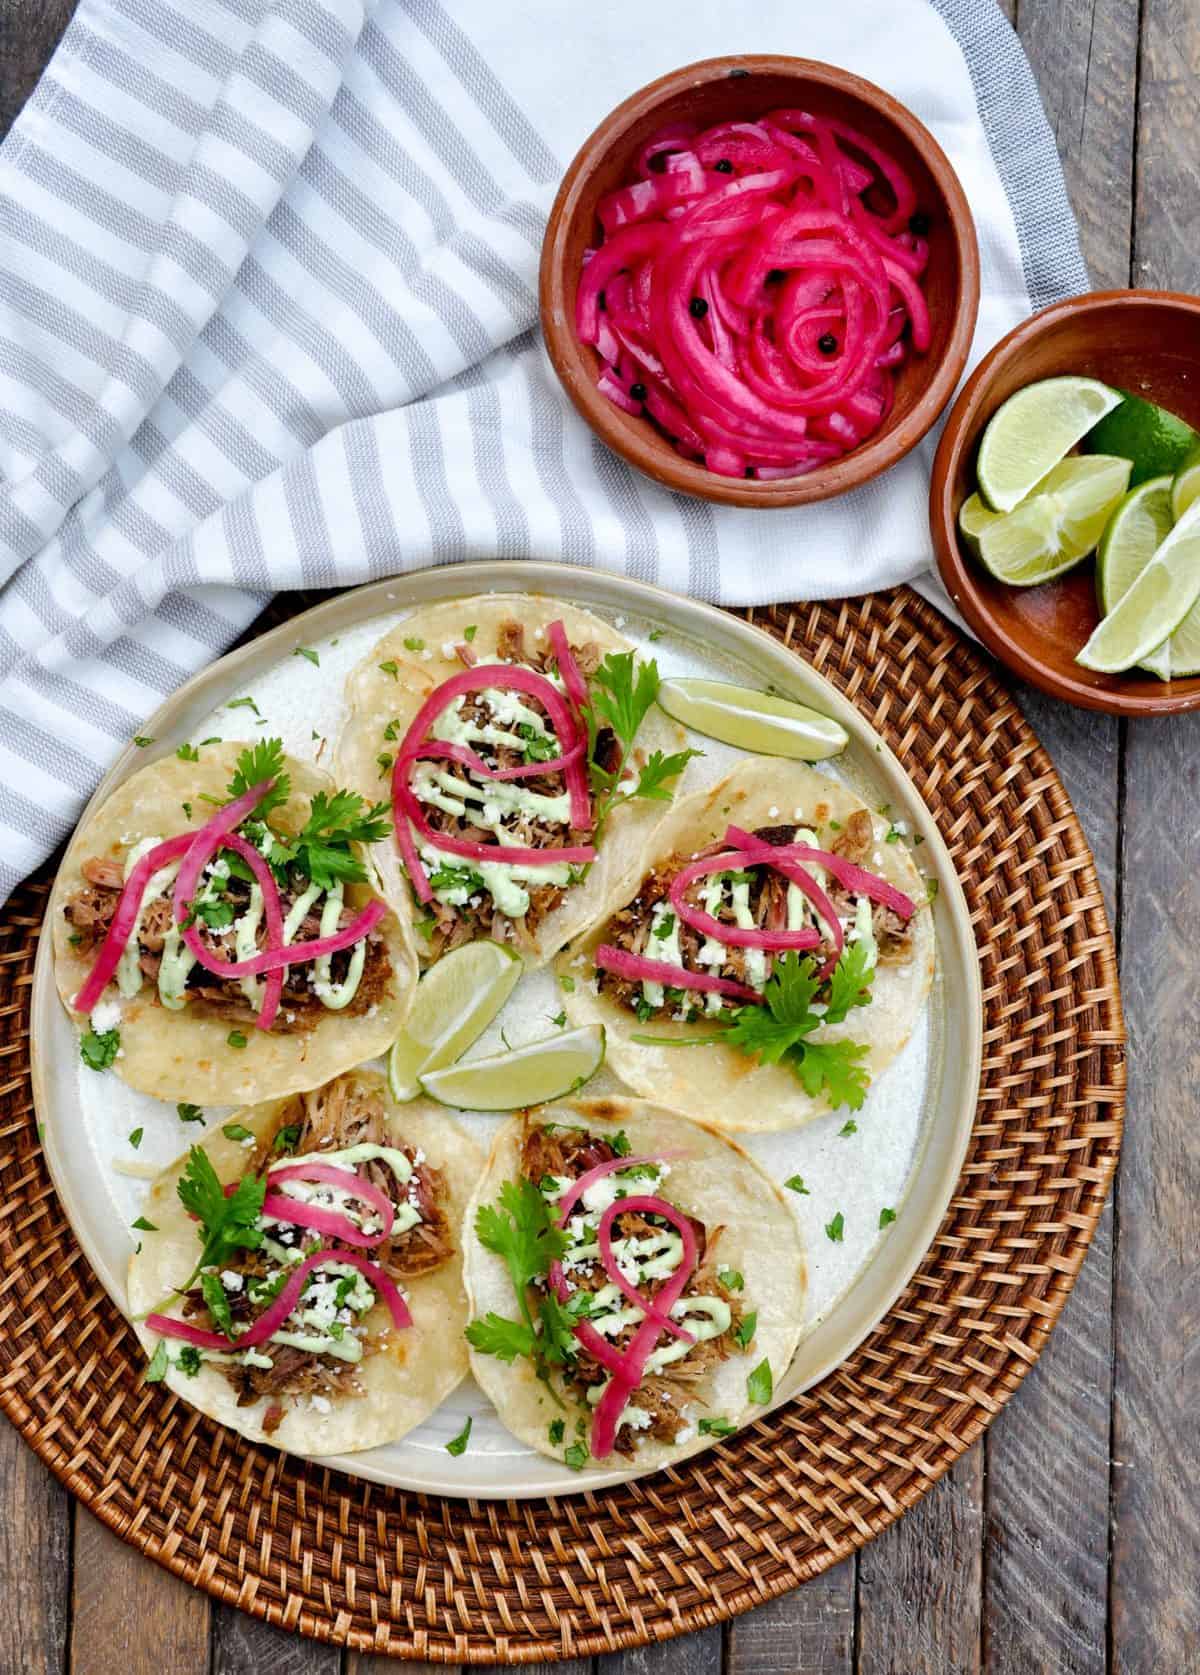 Ultimate Taco Topping Recipes:  Avocado Crema and Pickled Onions